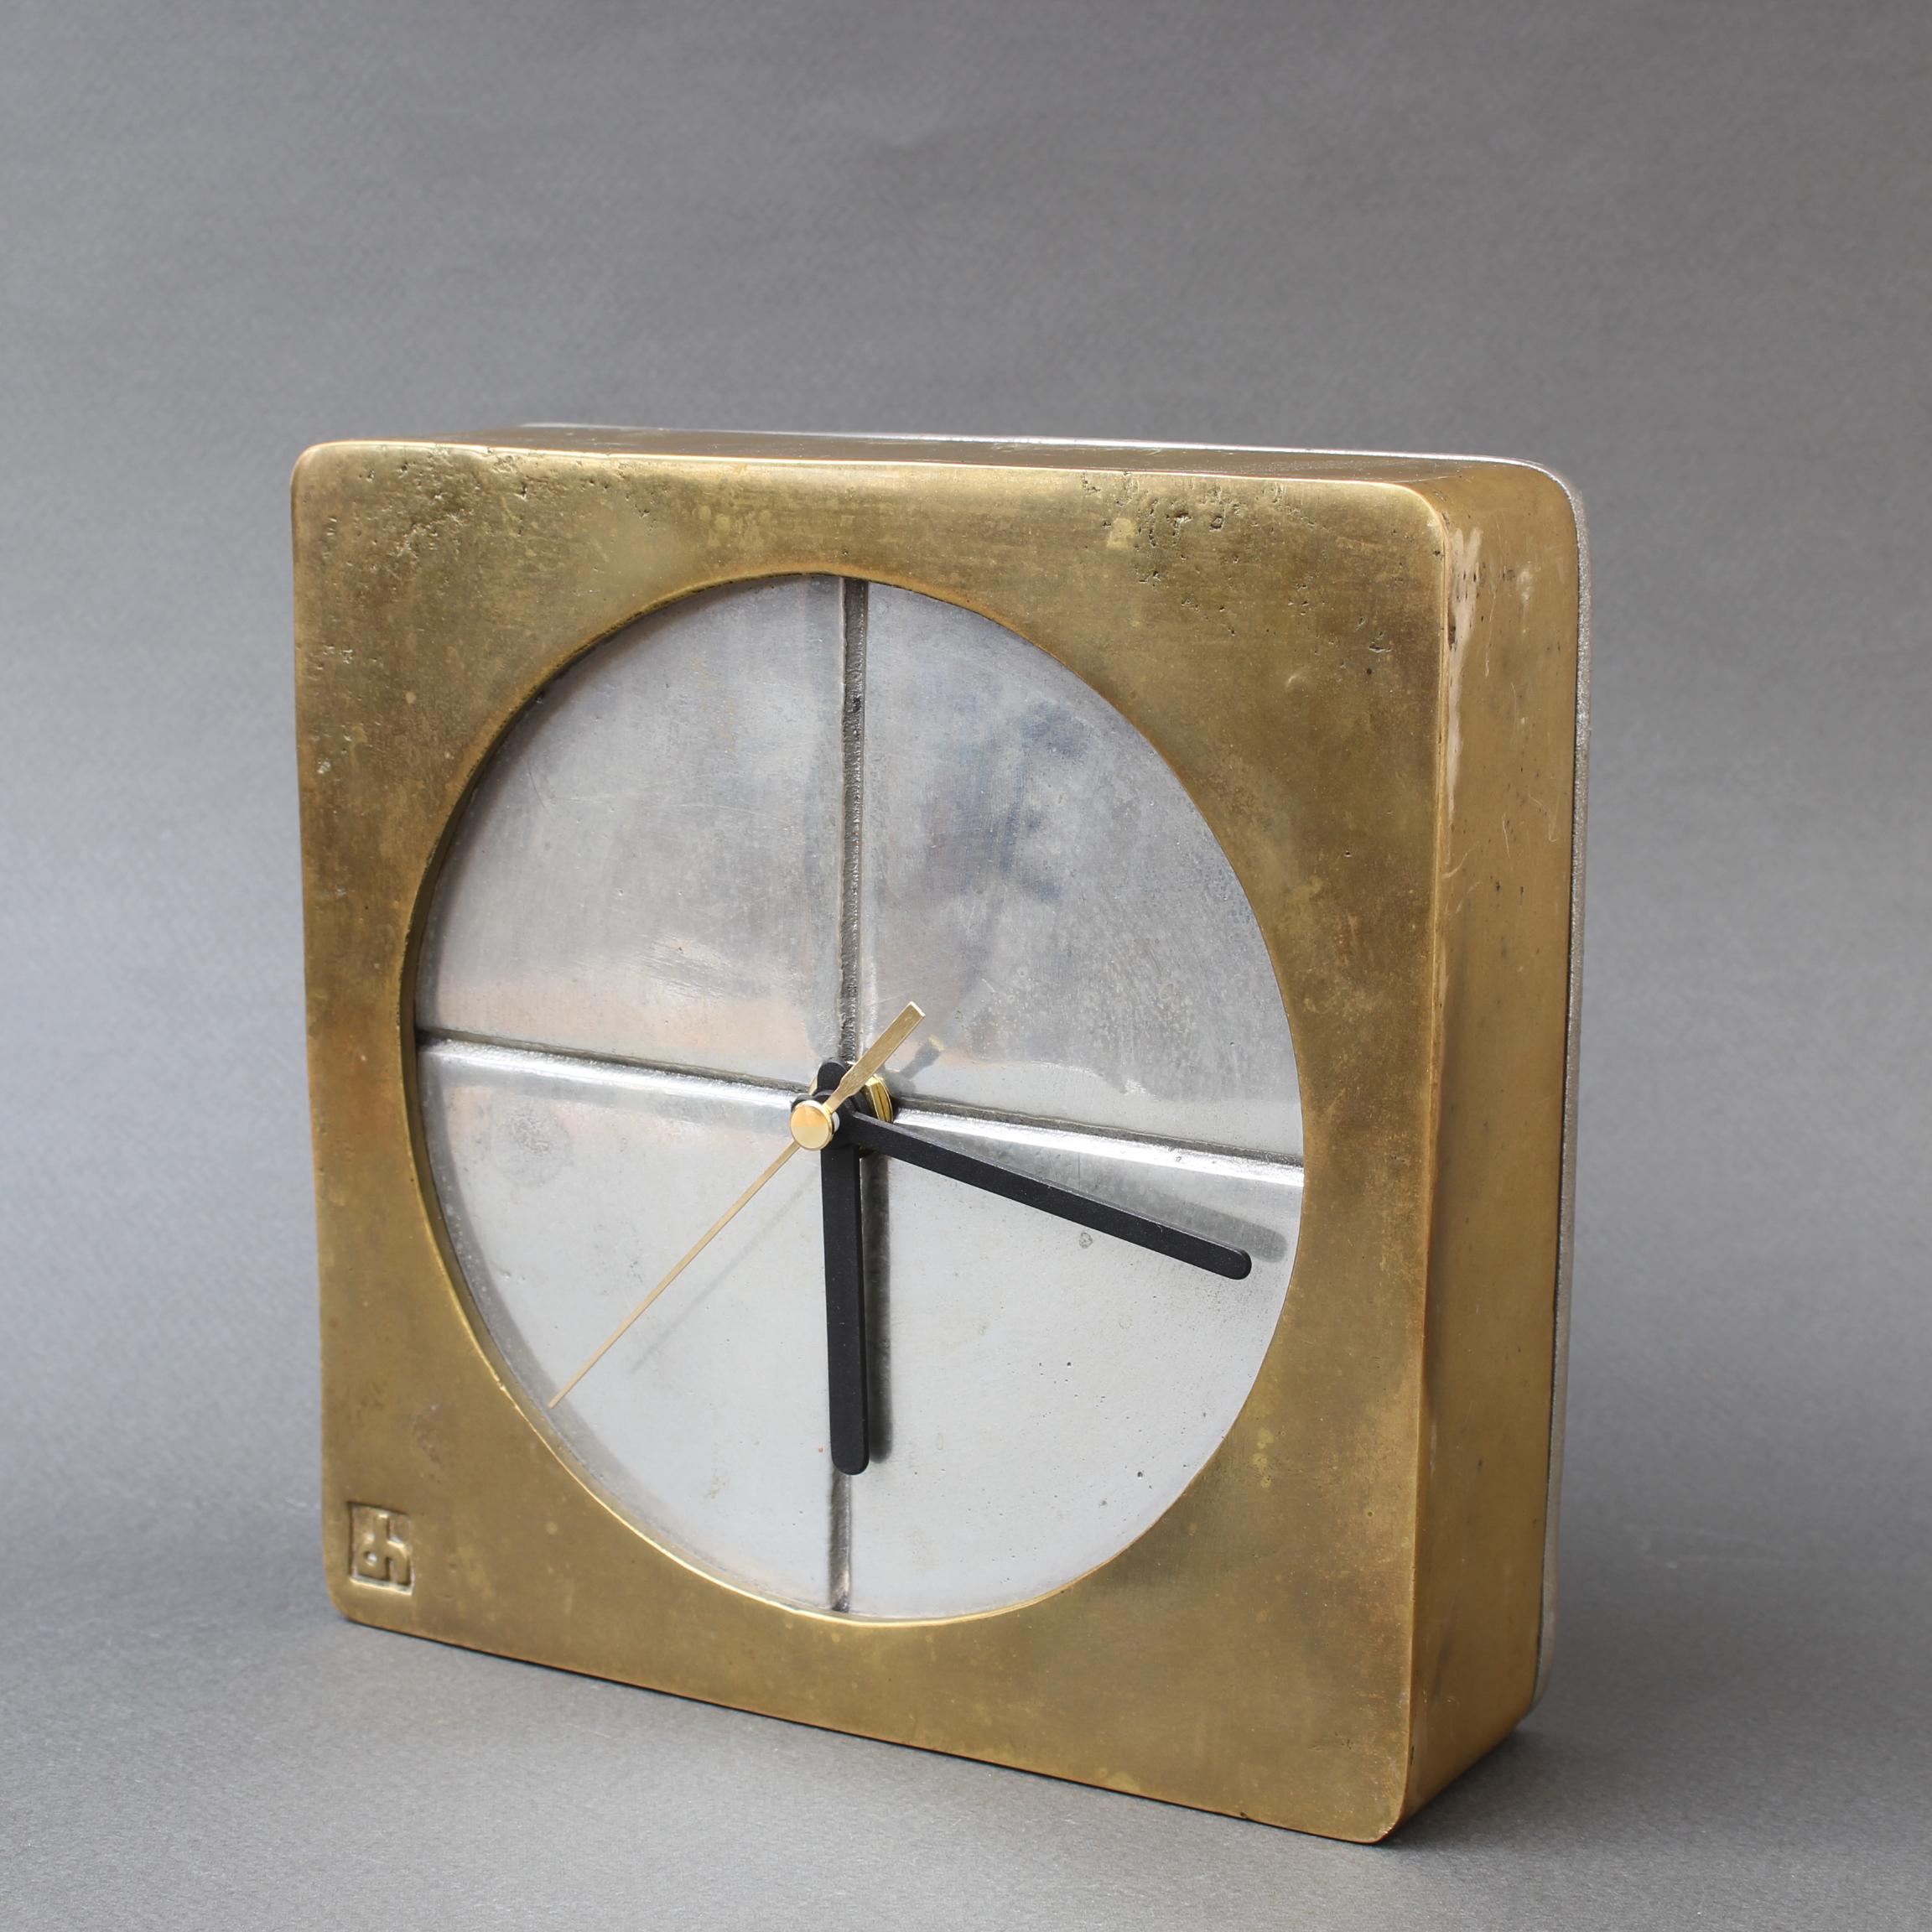 An aluminium and brass brutalist style decorative table clock by David Marshall, circa 1980s. The piece is weighty and wonderfully tactile with the maker's mark impressed on the front brass frame surrounding the clock face. The clock's original